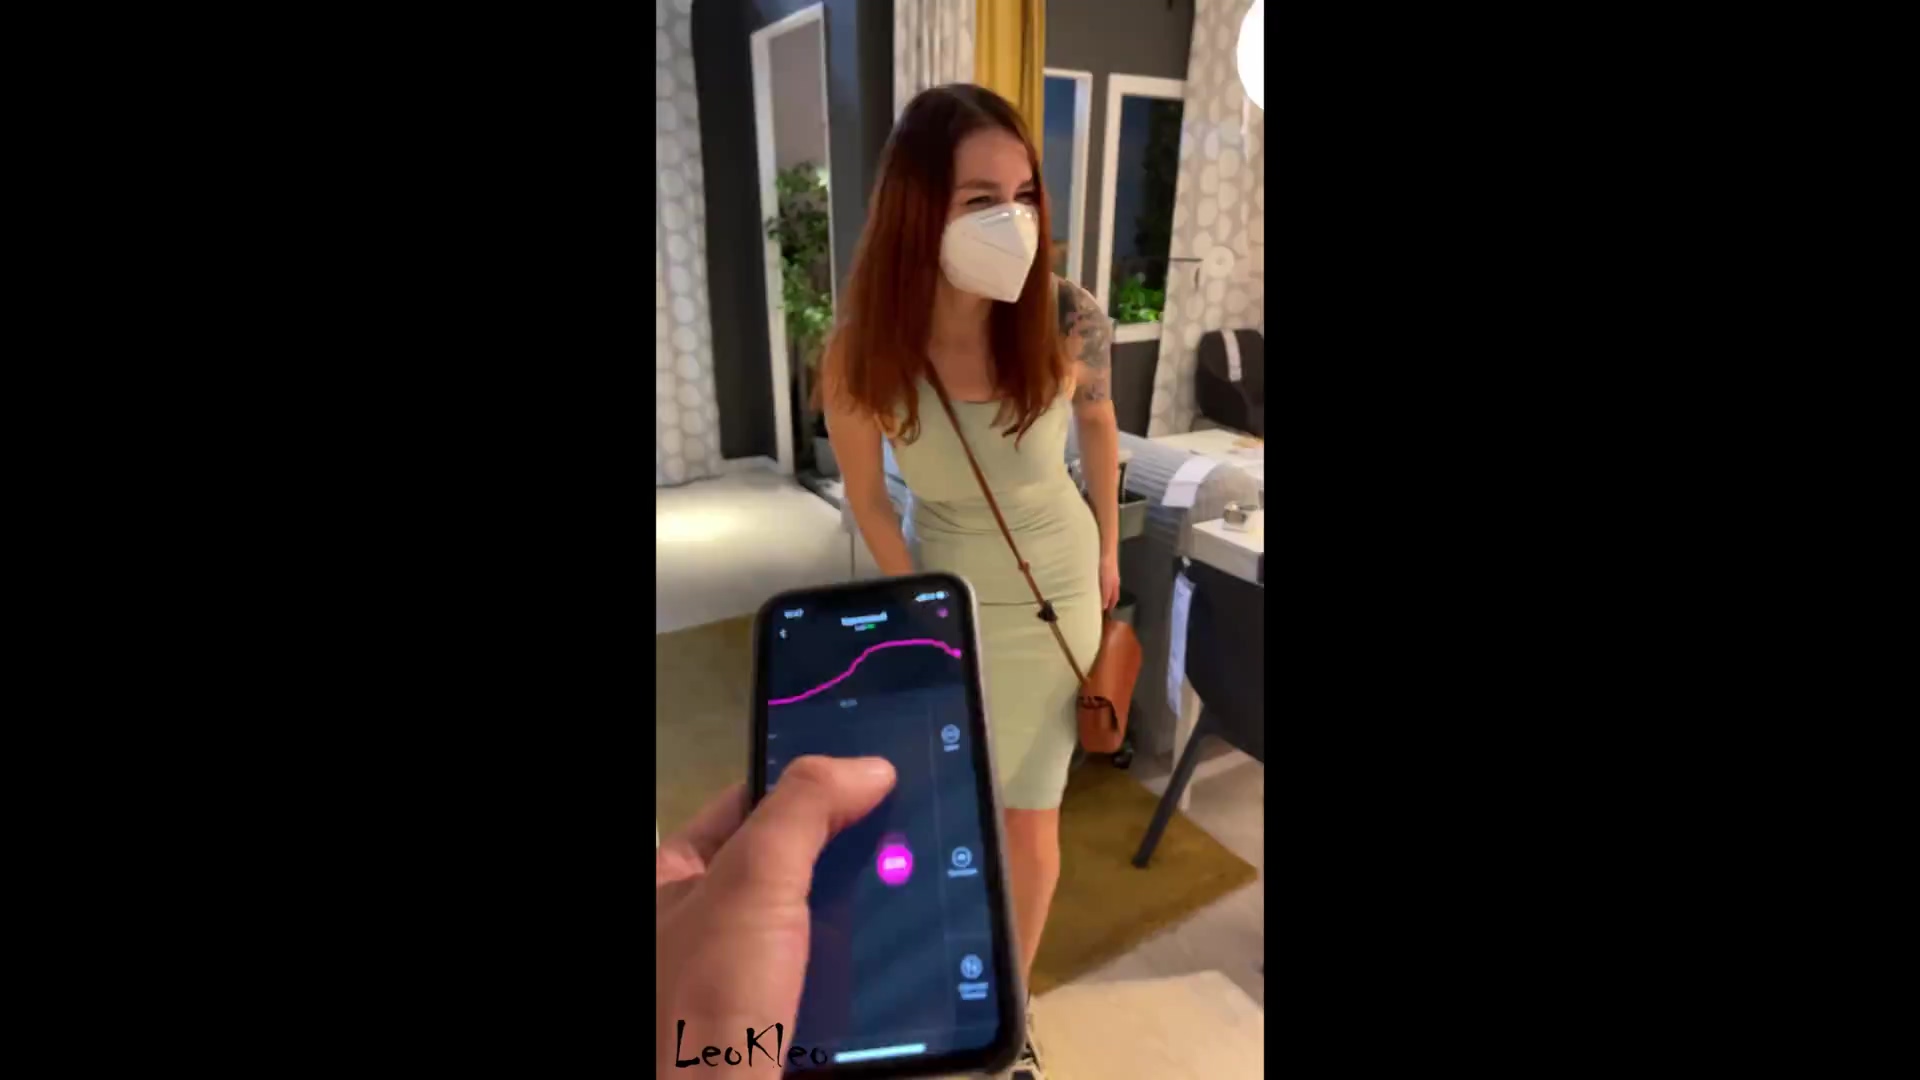 Guy presses the vibrator button while he and the girl are walking around the mall image